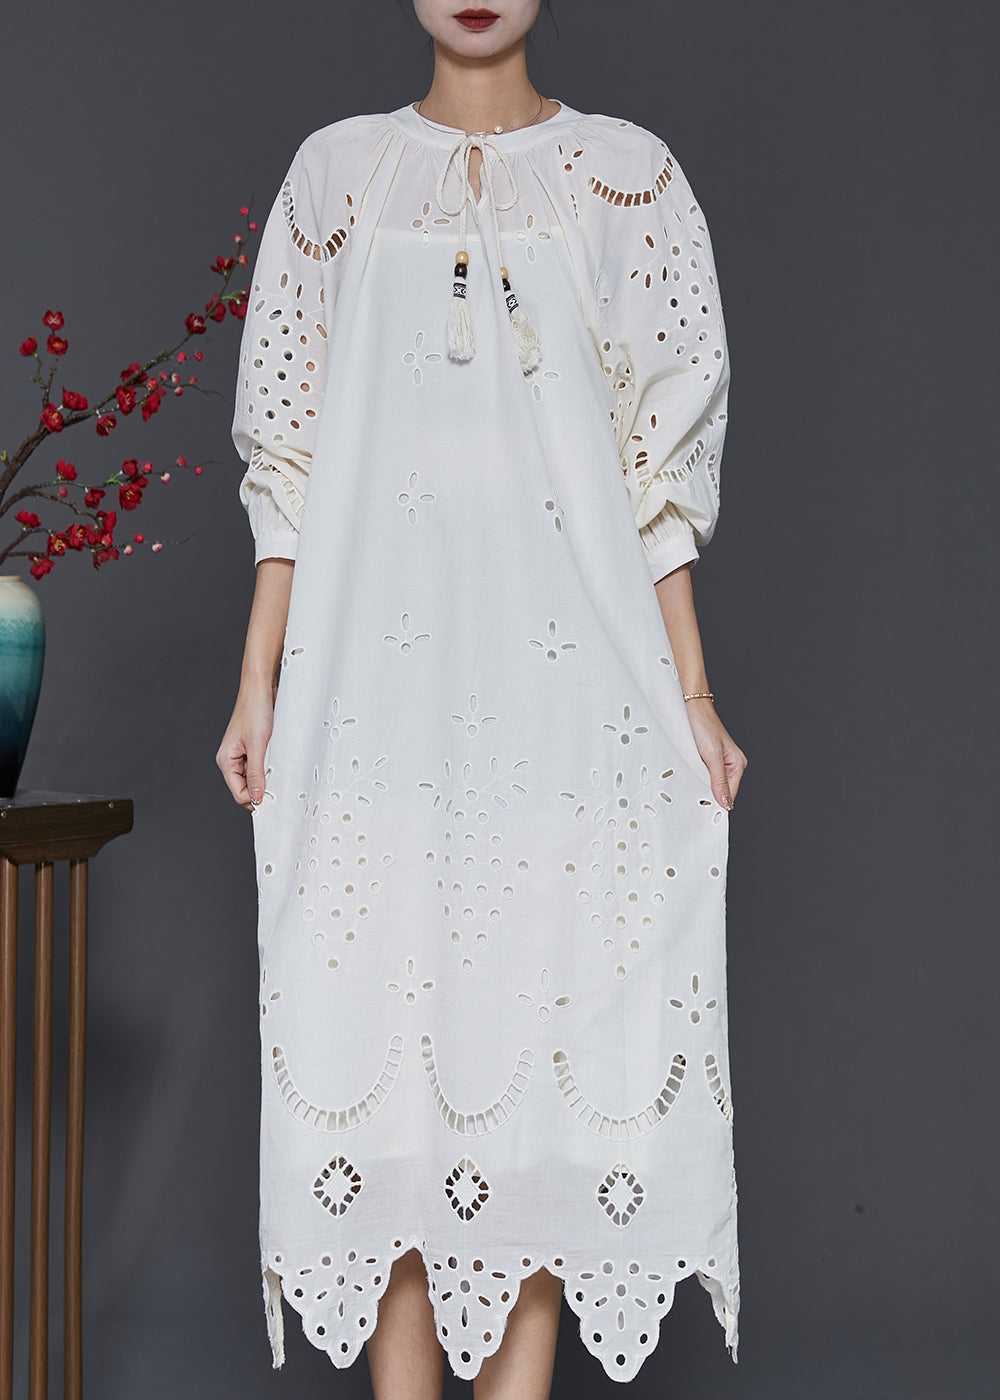 French White Hollow Out Cotton Long Dress Spring